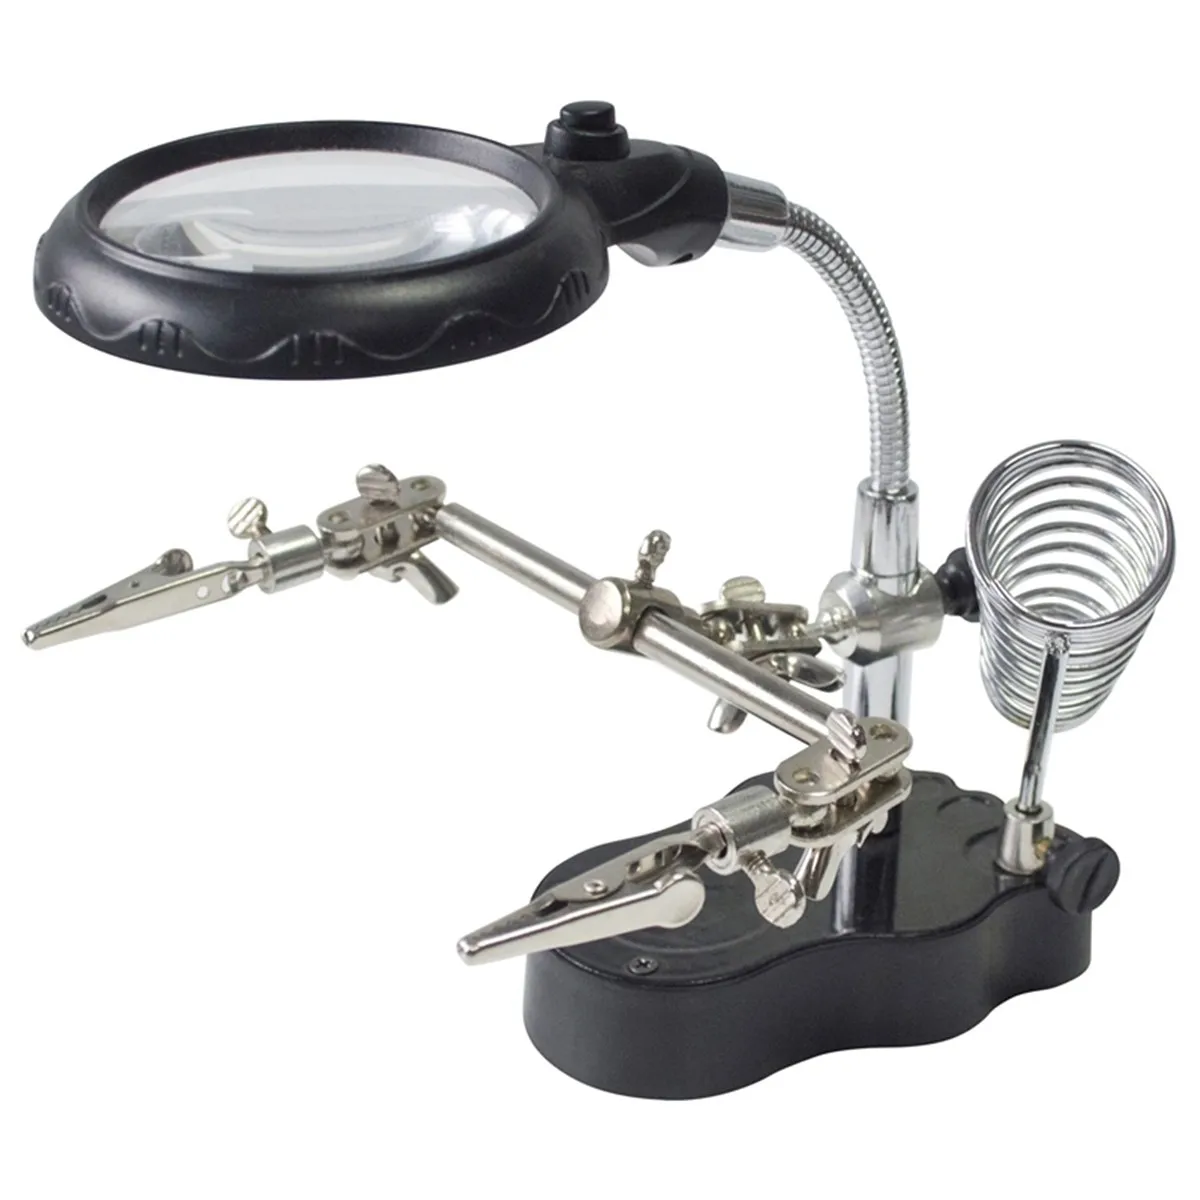 LED Helping Hand Clamp Magnifying Glass Soldering Iron Stand Lens Magnifier Kit 